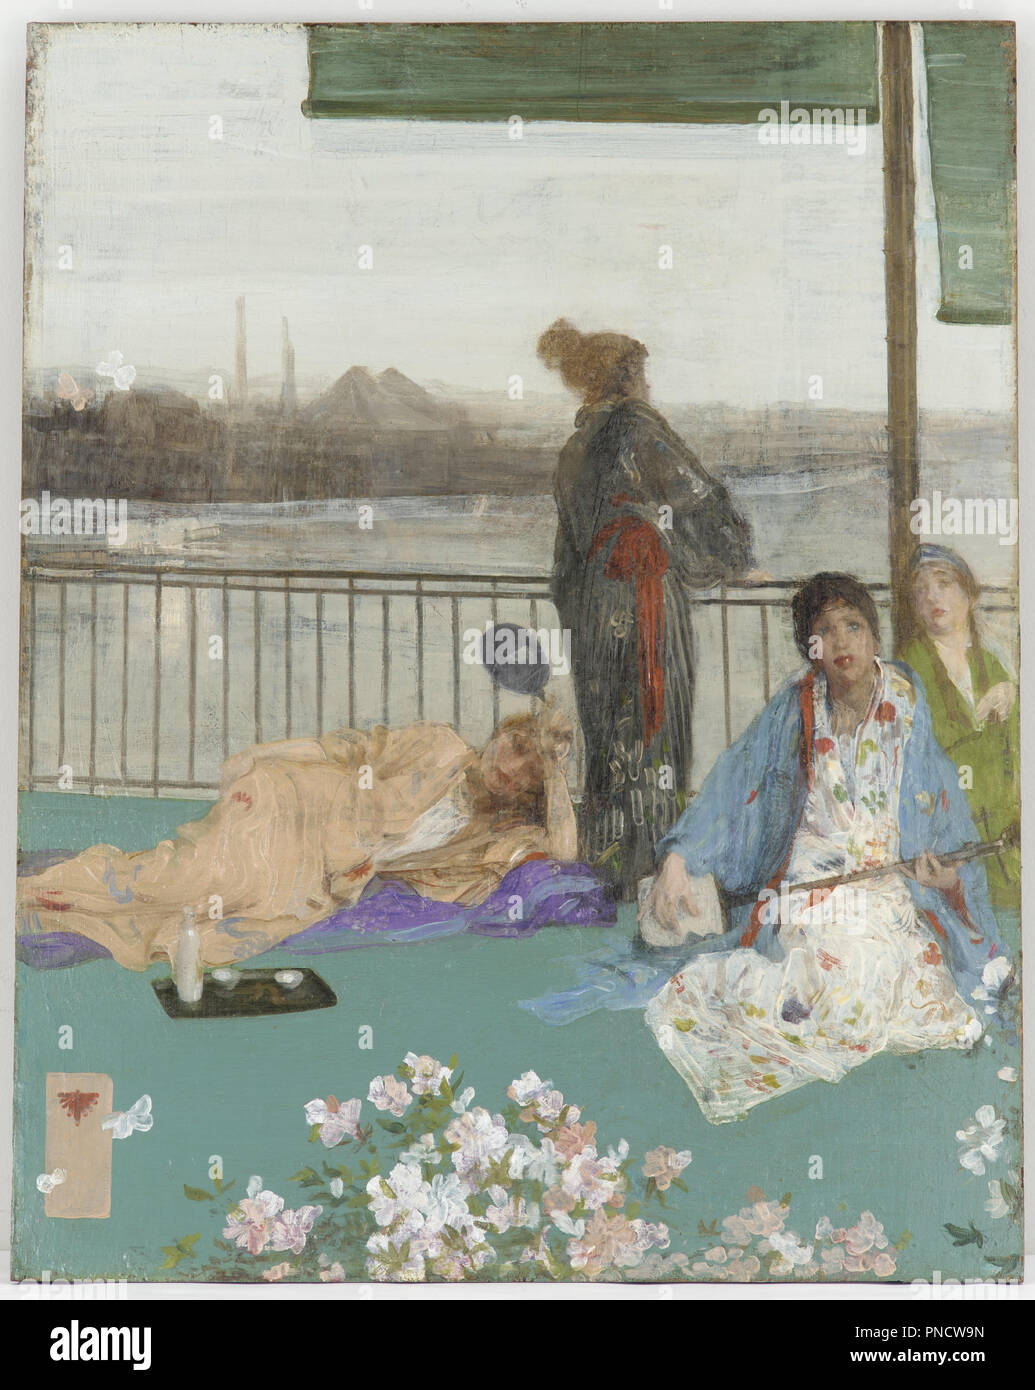 Variations in Flesh Colour and Green--The Balcony. Date/Period: From 1864 until 1879. Painting. Oil on wood panel. Height: 61.4 cm (24.1 in); Width: 48.8 cm (19.2 in). Author: WHISTLER, JAMES ABBOTT MCNEILL. JAMES MACNEILL WHISTLER. Stock Photo